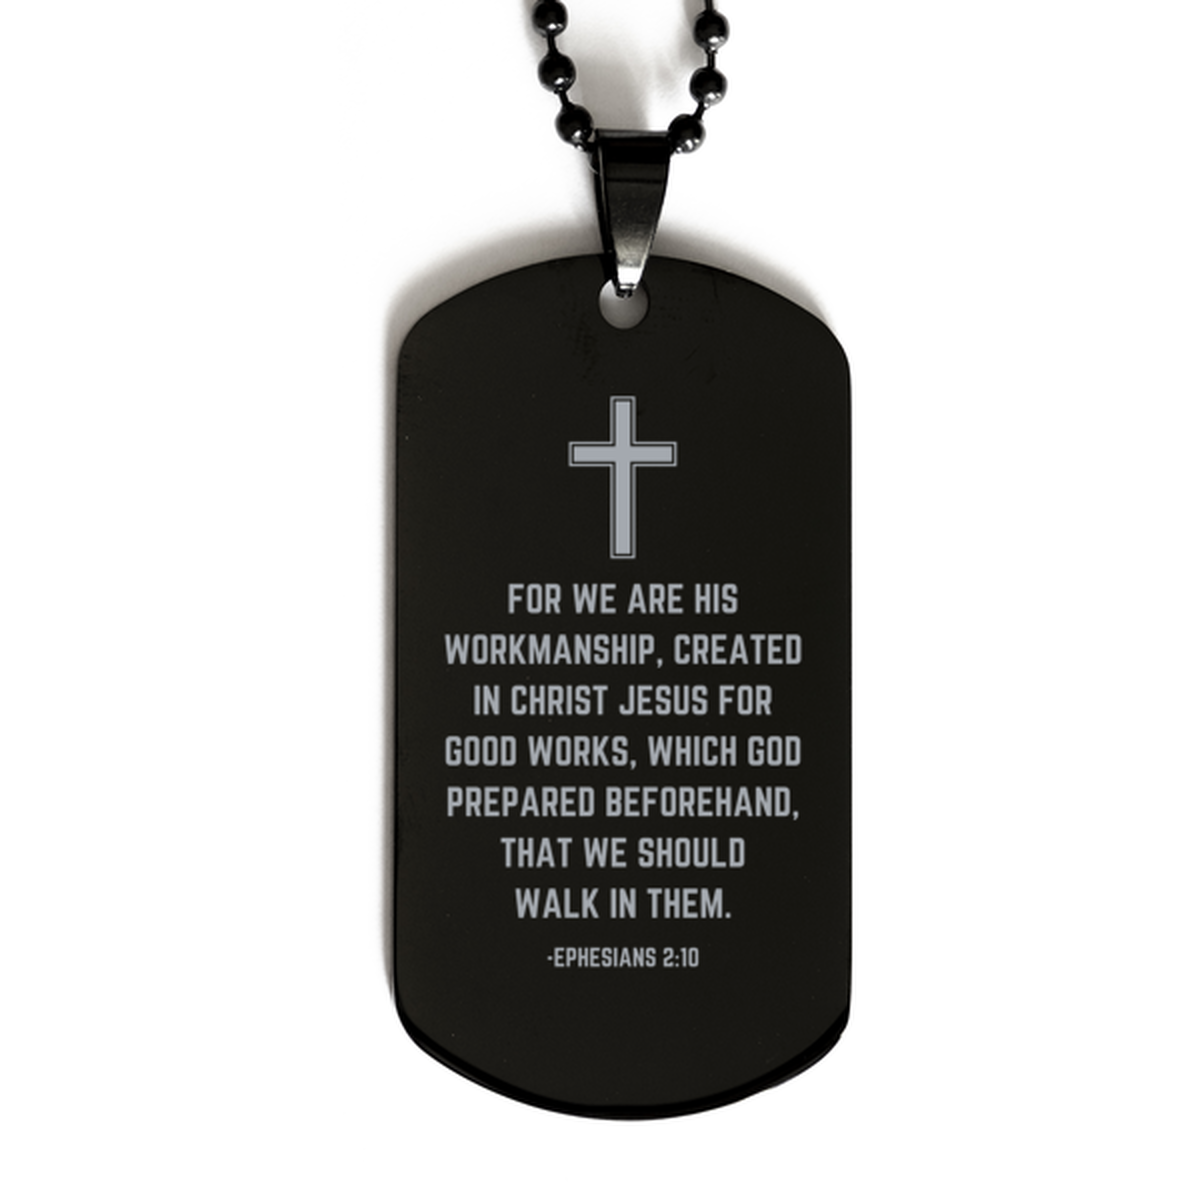 Baptism Gifts For Teenage Boys Girls, Christian Bible Verse Black Dog Tag, For we are His workmanship, Confirmation Gifts, Bible Verse Necklace for Son, Godson, Grandson, Nephew